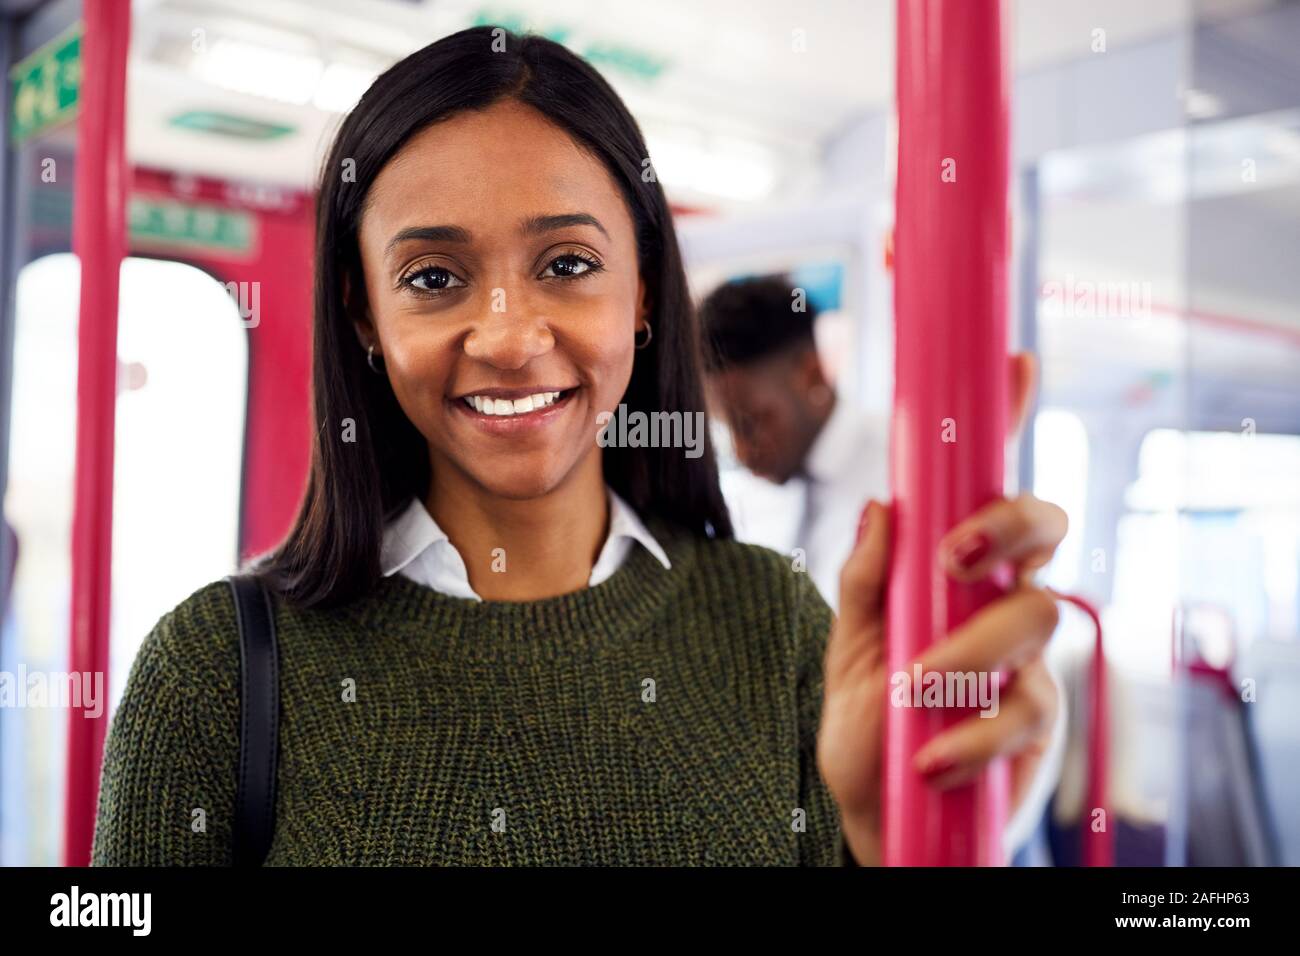 Portrait Of Smiling Female Passenger Standing By Doors In Train Stock Photo